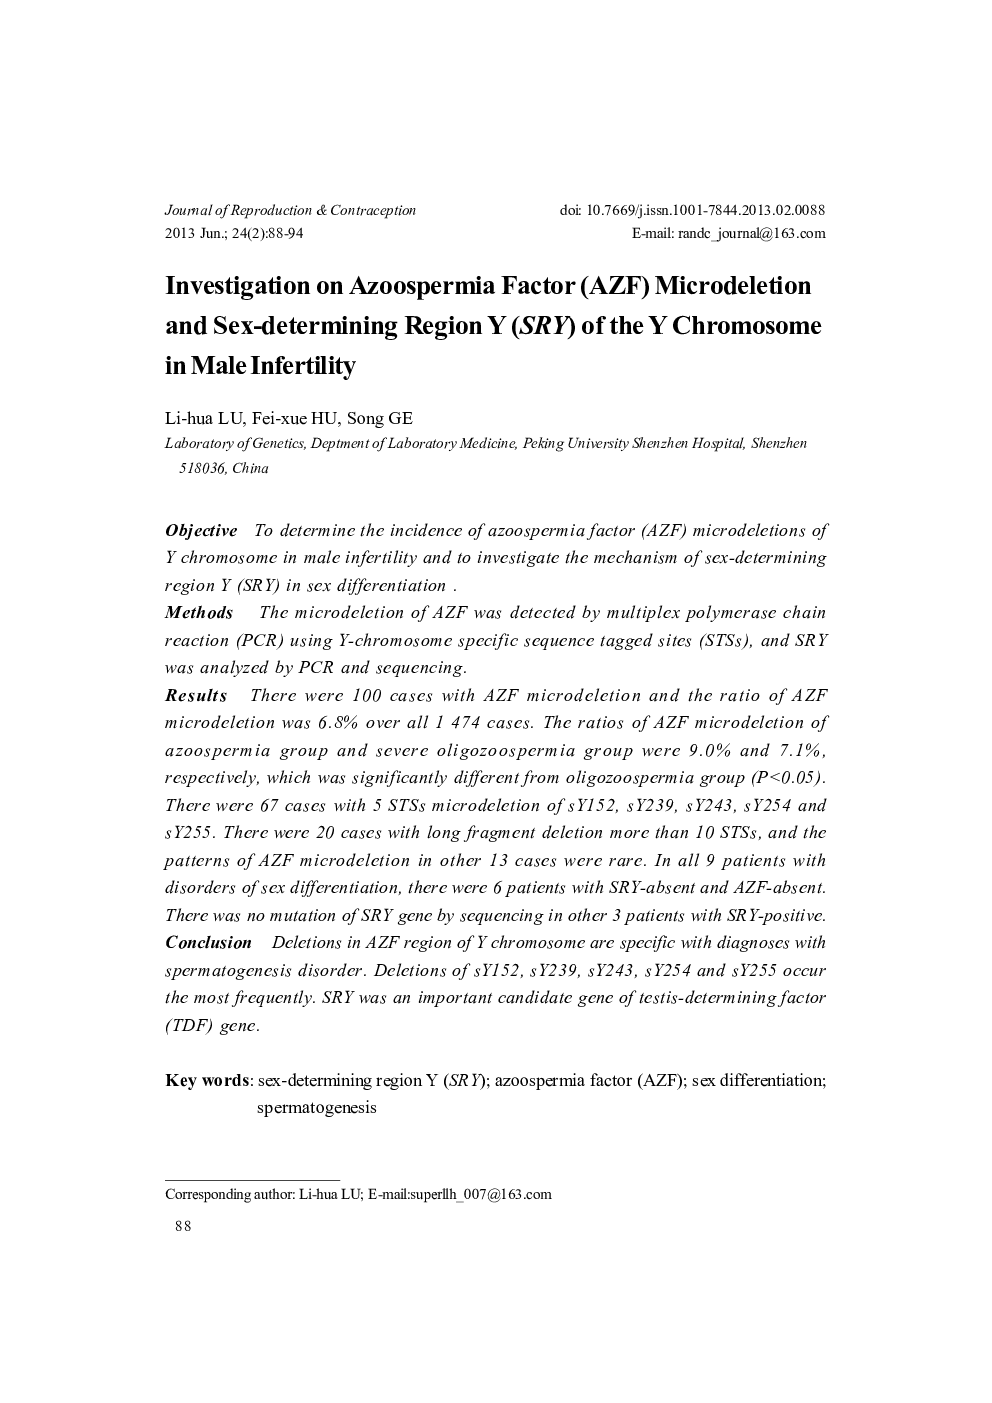 Investigation on Azoospermia Factor (AZF) Microdeletion and Sex-determining Region Y (SRY) of the Y Chromosome in Male Infertility